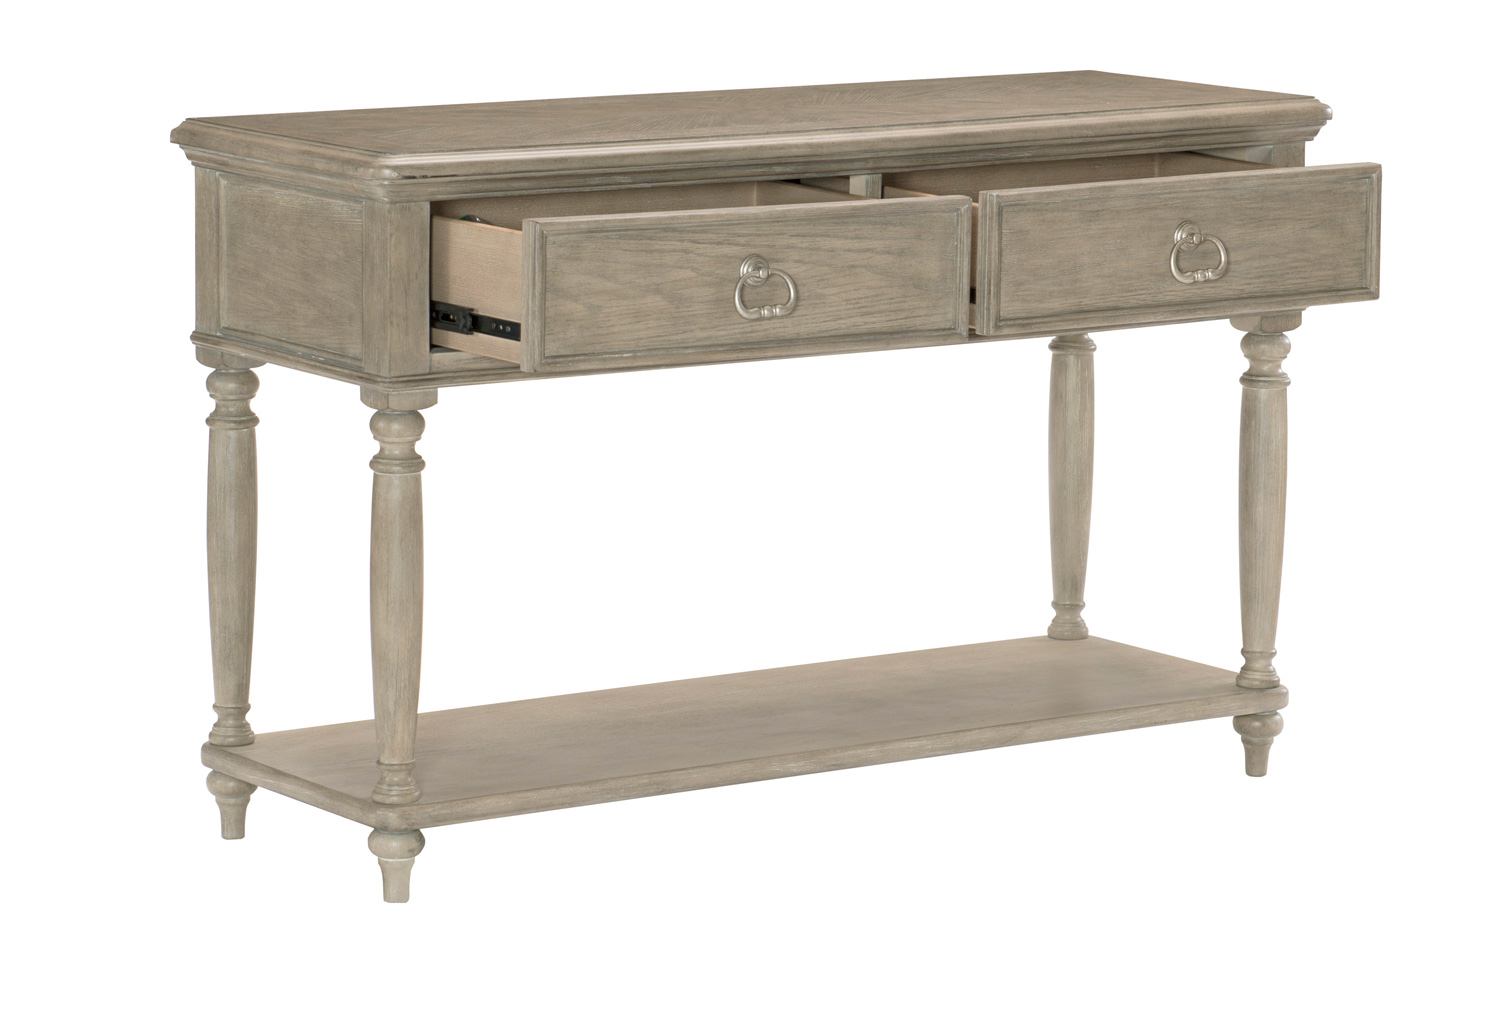 Homelegance Grayling Down Sofa Table with Two Functional Drawers - Driftwood Gray